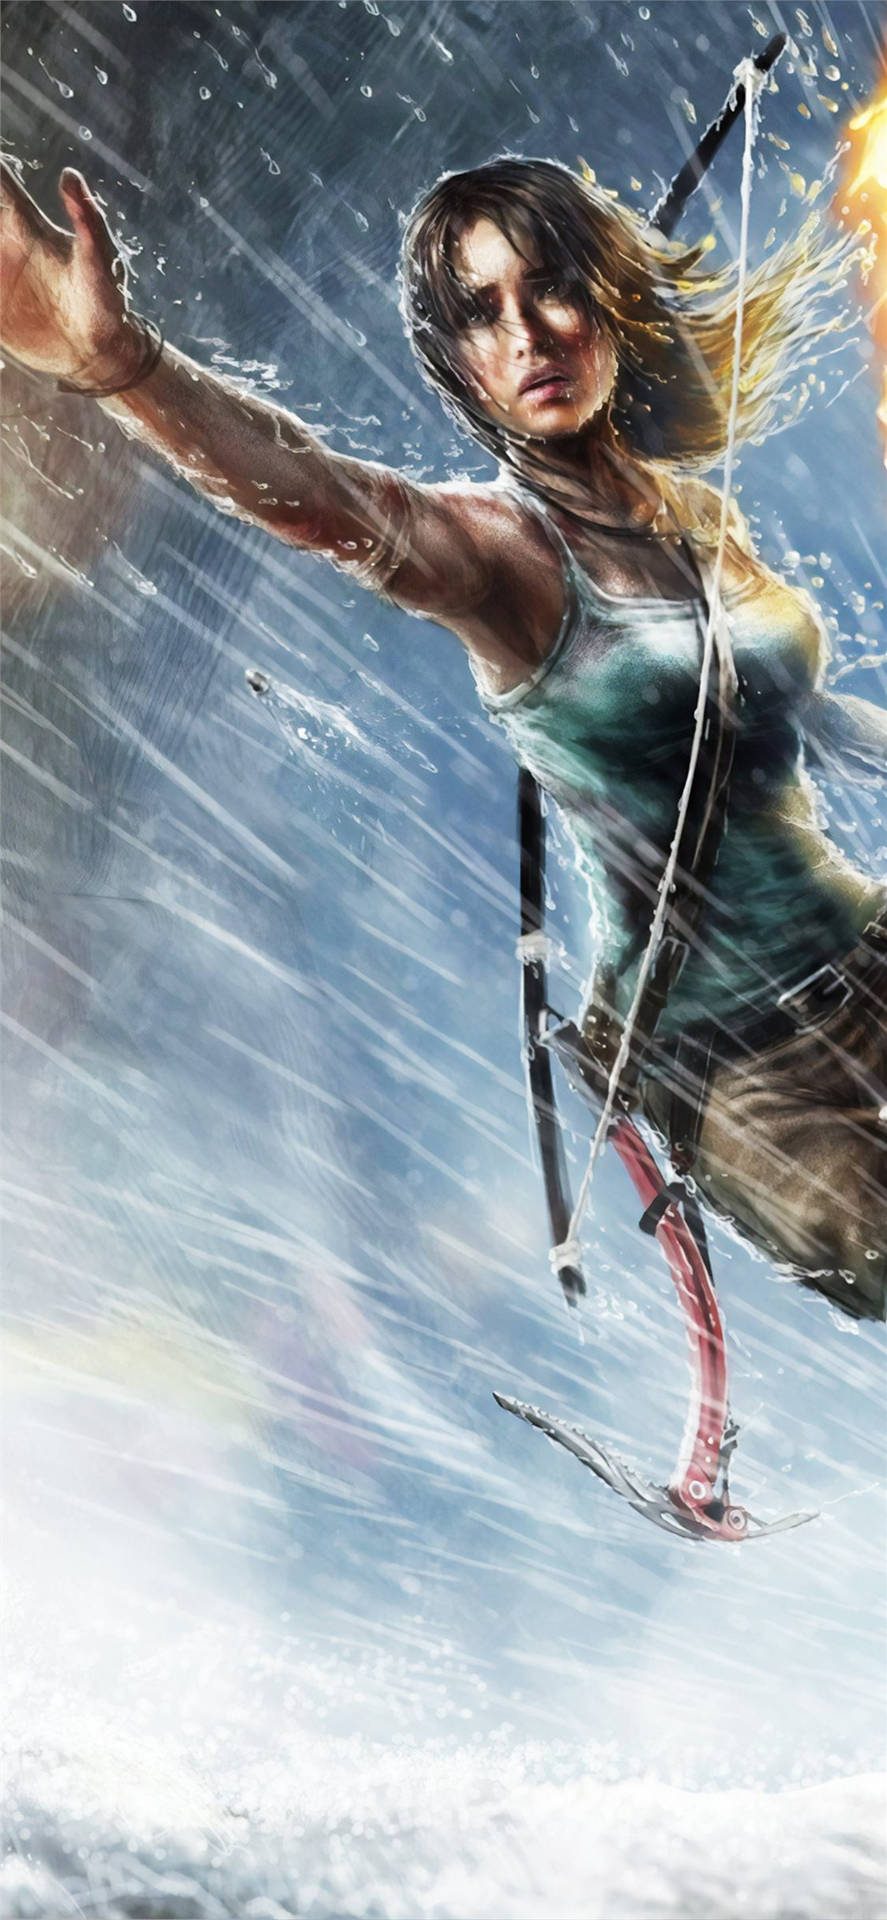 Get ready to take-on the adventure with Lara Croft on the go with your Iphone. Wallpaper